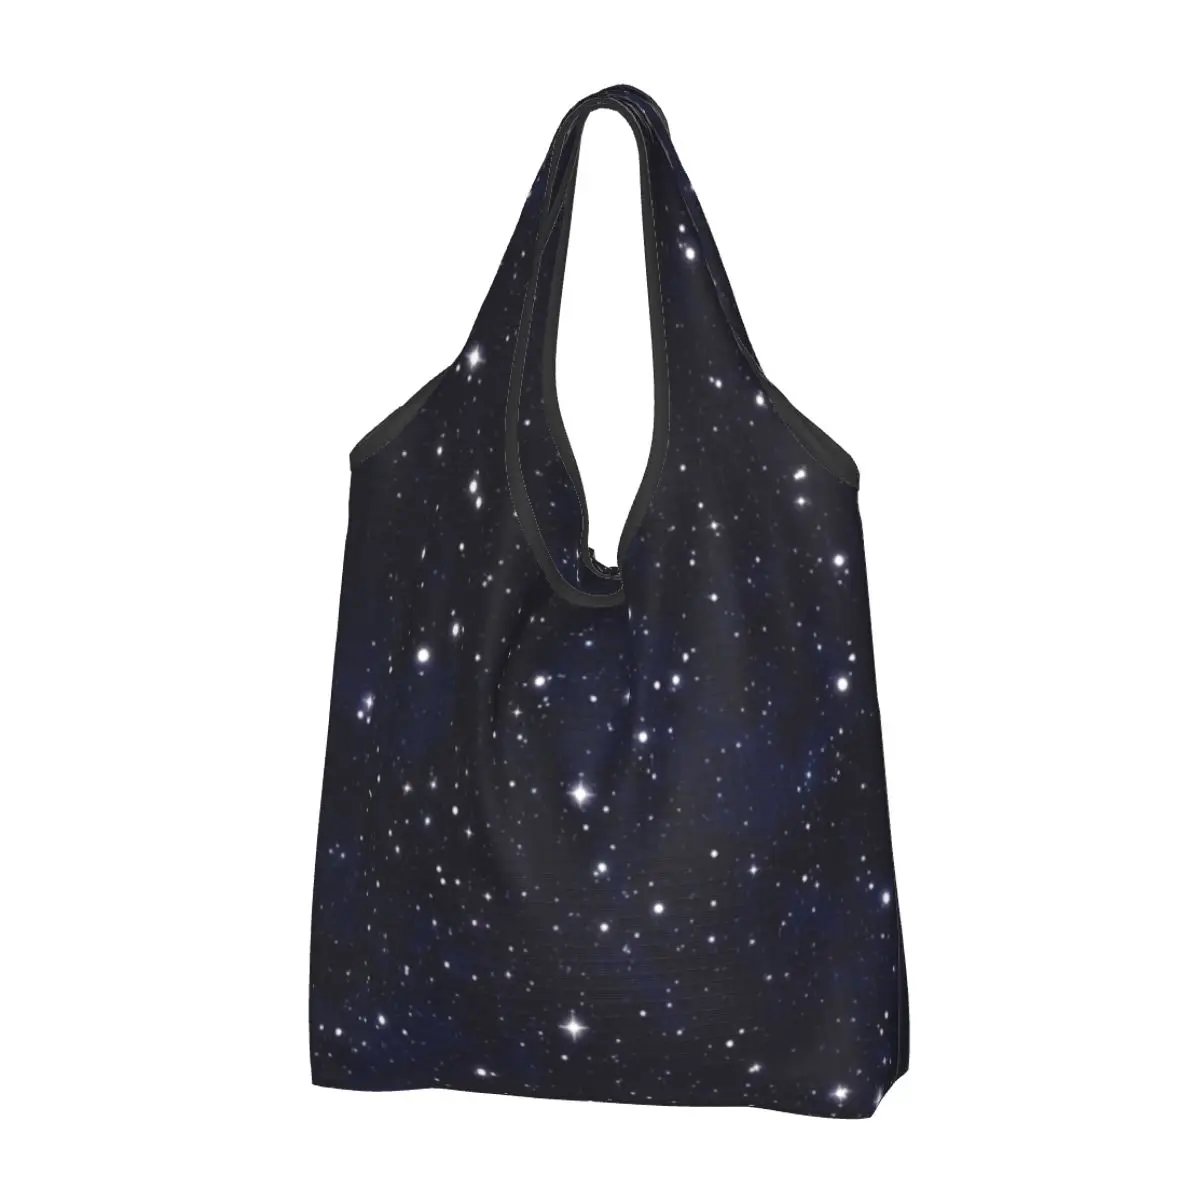 

Funny Night Sky Space Galaxy Shopping Tote Bag Portable Universe Grocery Shoulder Shopper Bag